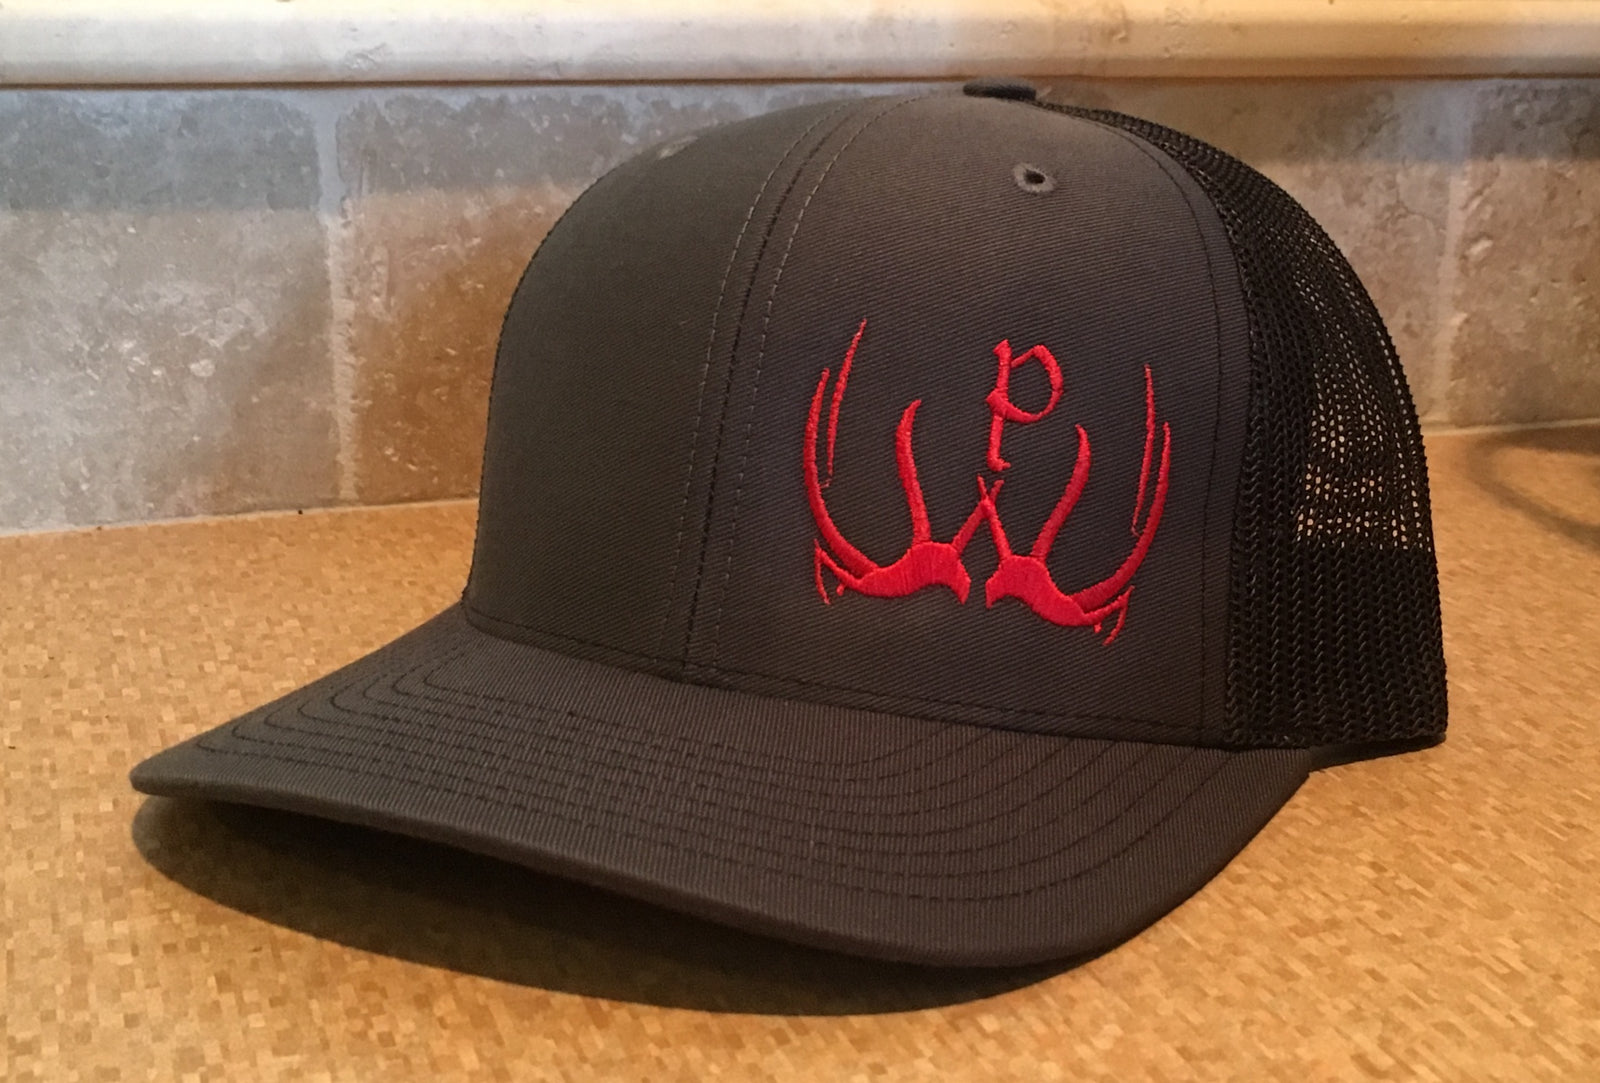 Pursue The Wild Charcoal Grey Logo Hats